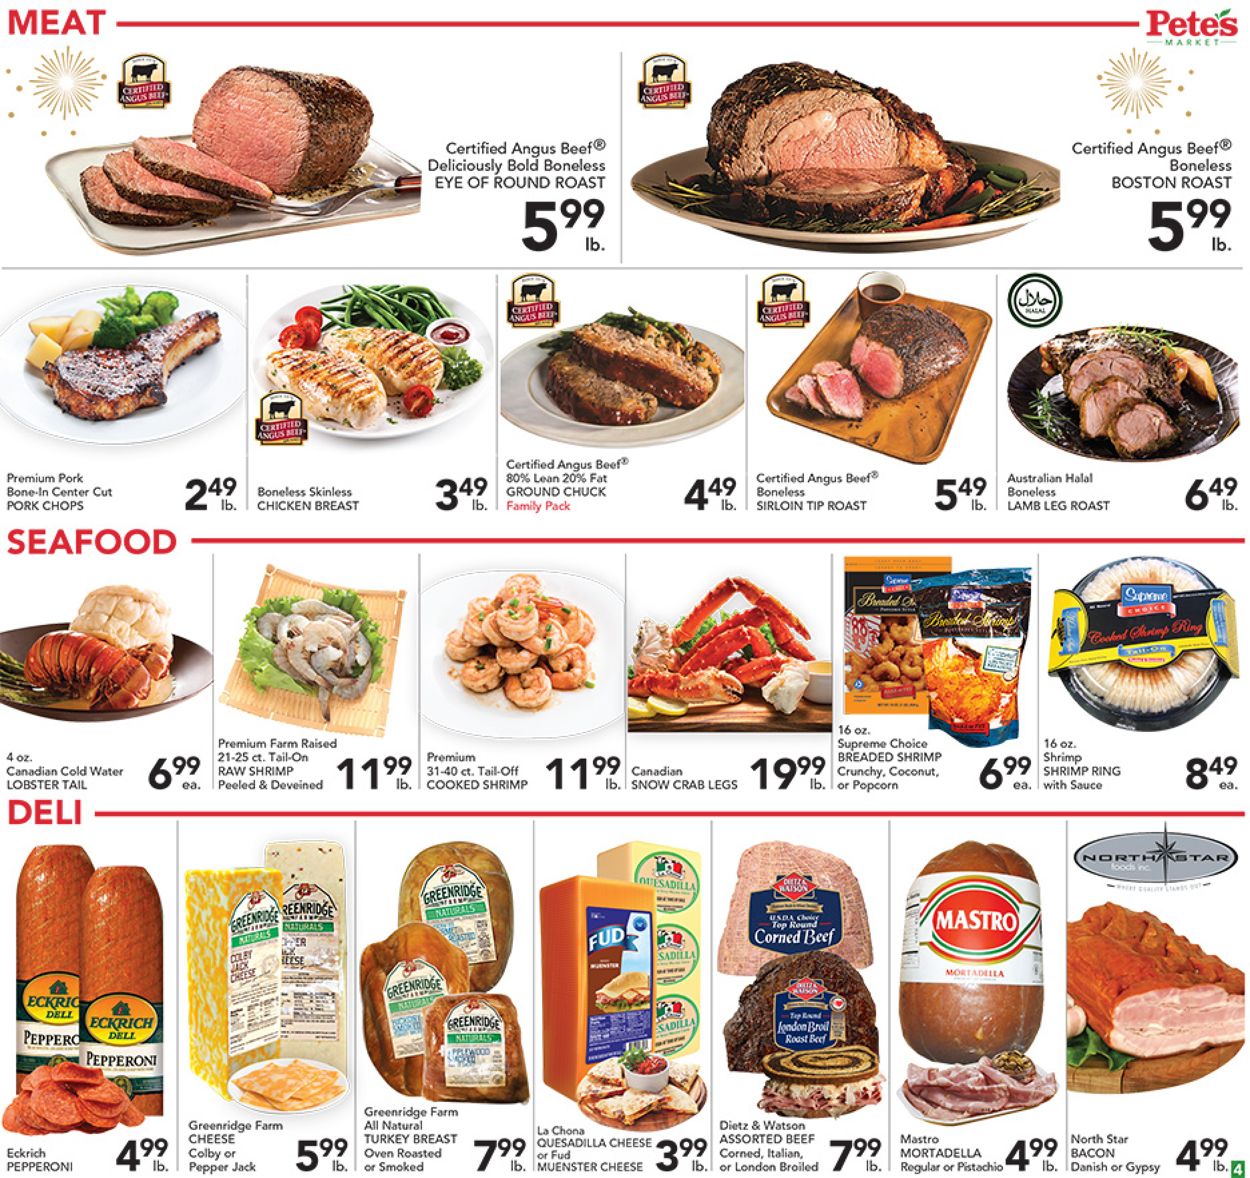 Pete's Fresh Market Current weekly ad 12/29 01/04/2022 [4] frequent